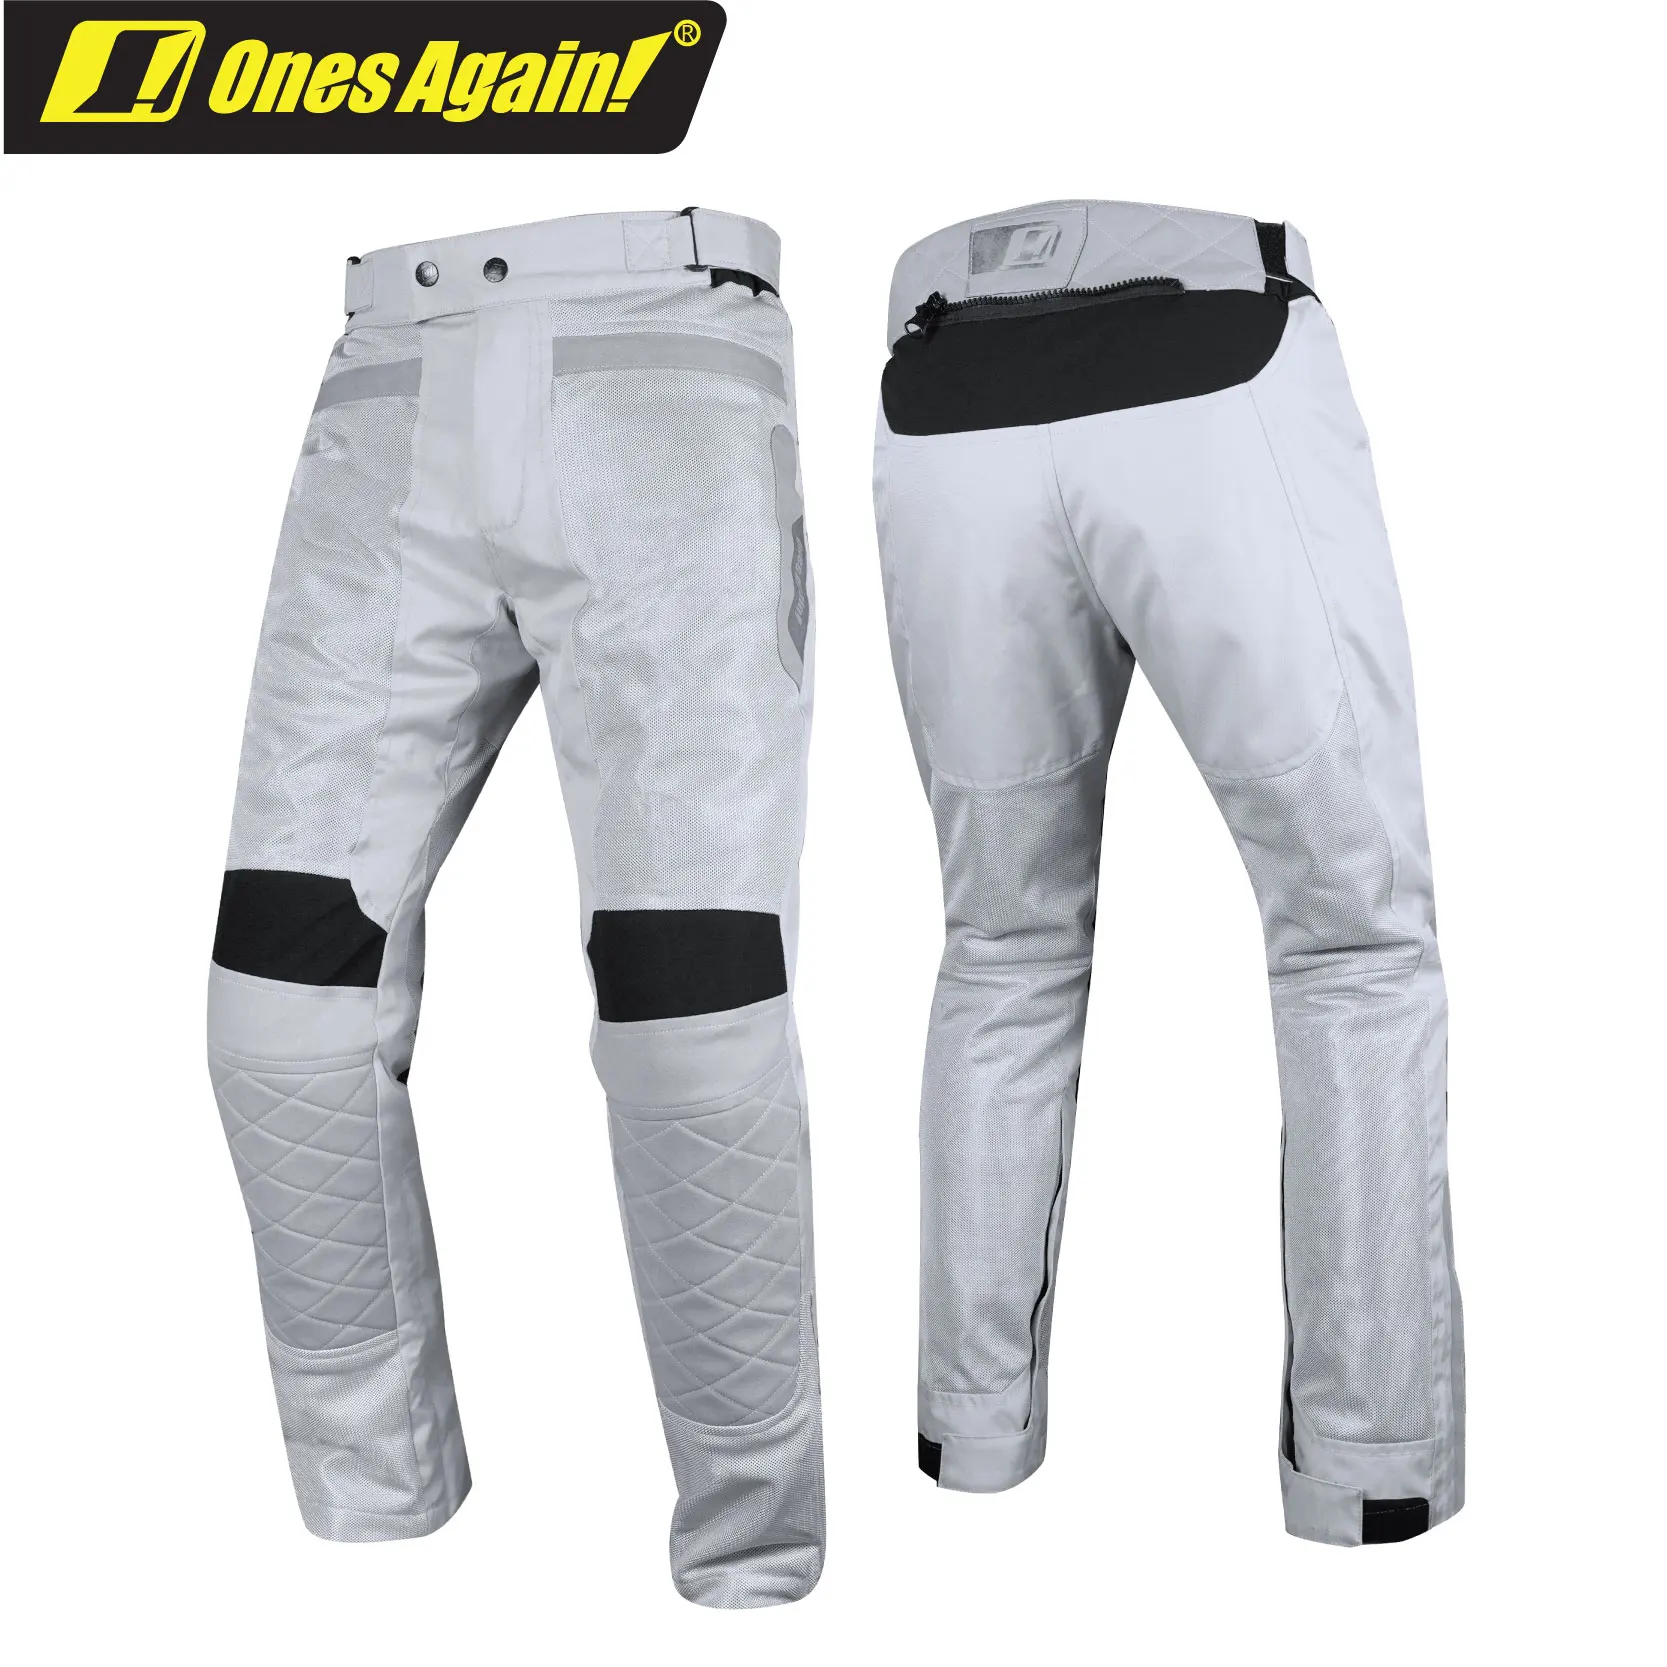 Ones Again! SP01 Men Motorcycle Cycling Pants Spring Summer Breathable Leisure Motocross Riding Trousers enlarge